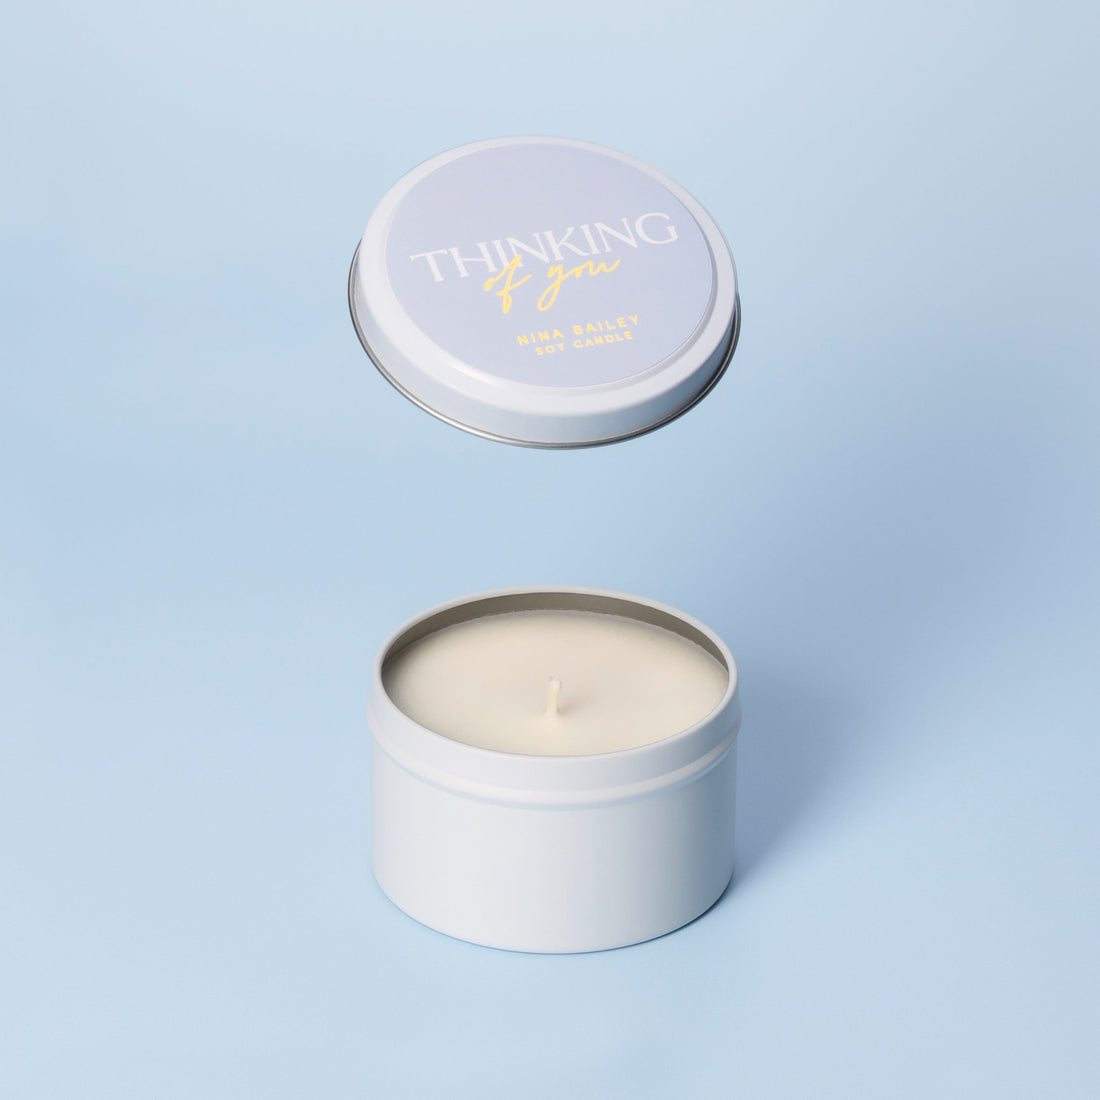 Thinking of You - Occasion Candle - Nina Bailey